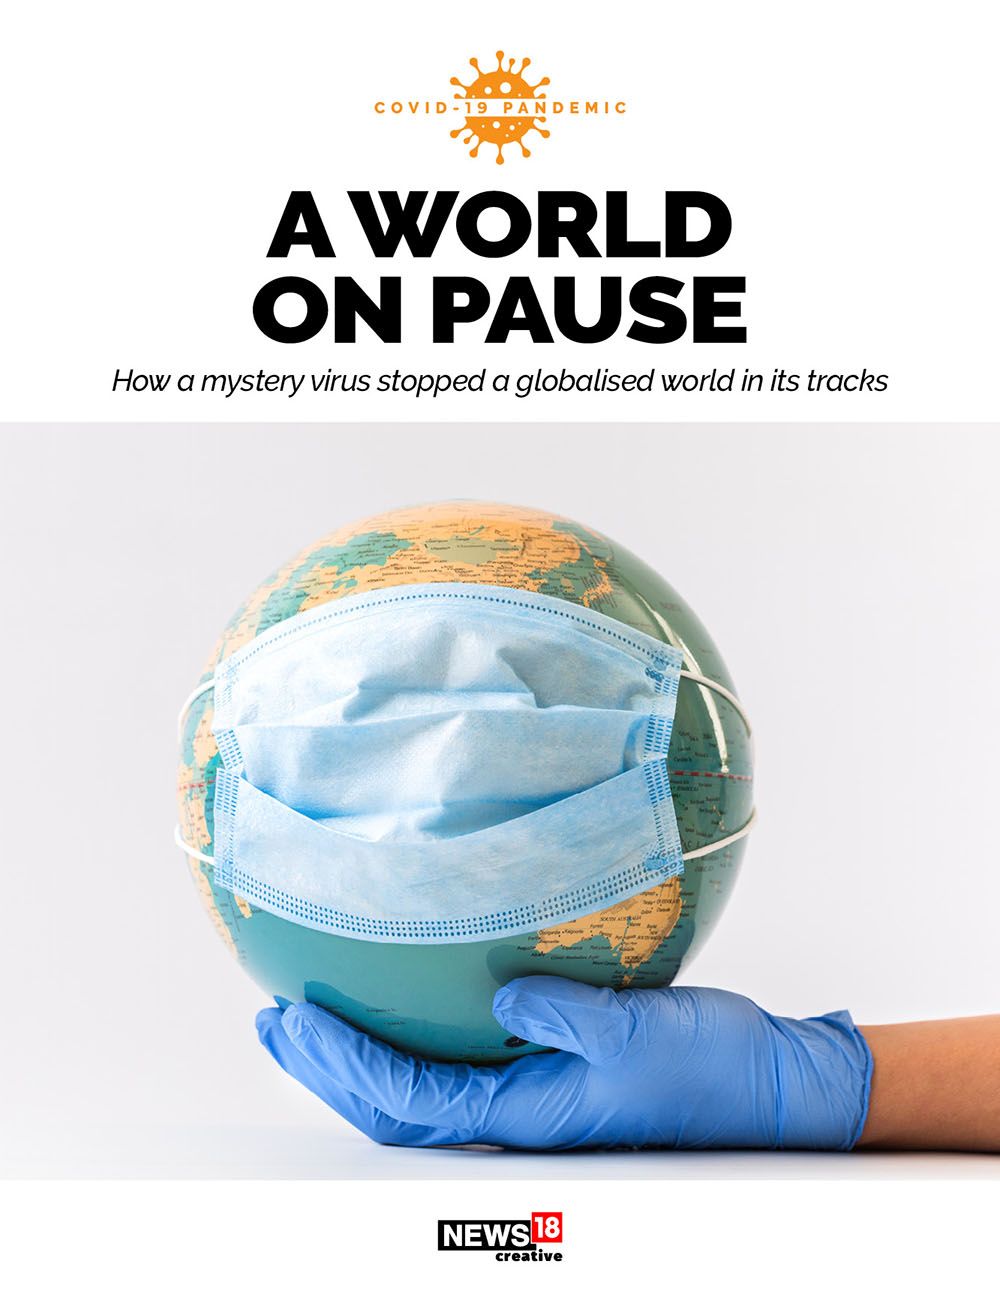 A planet on pause: The 100 days that changed the world